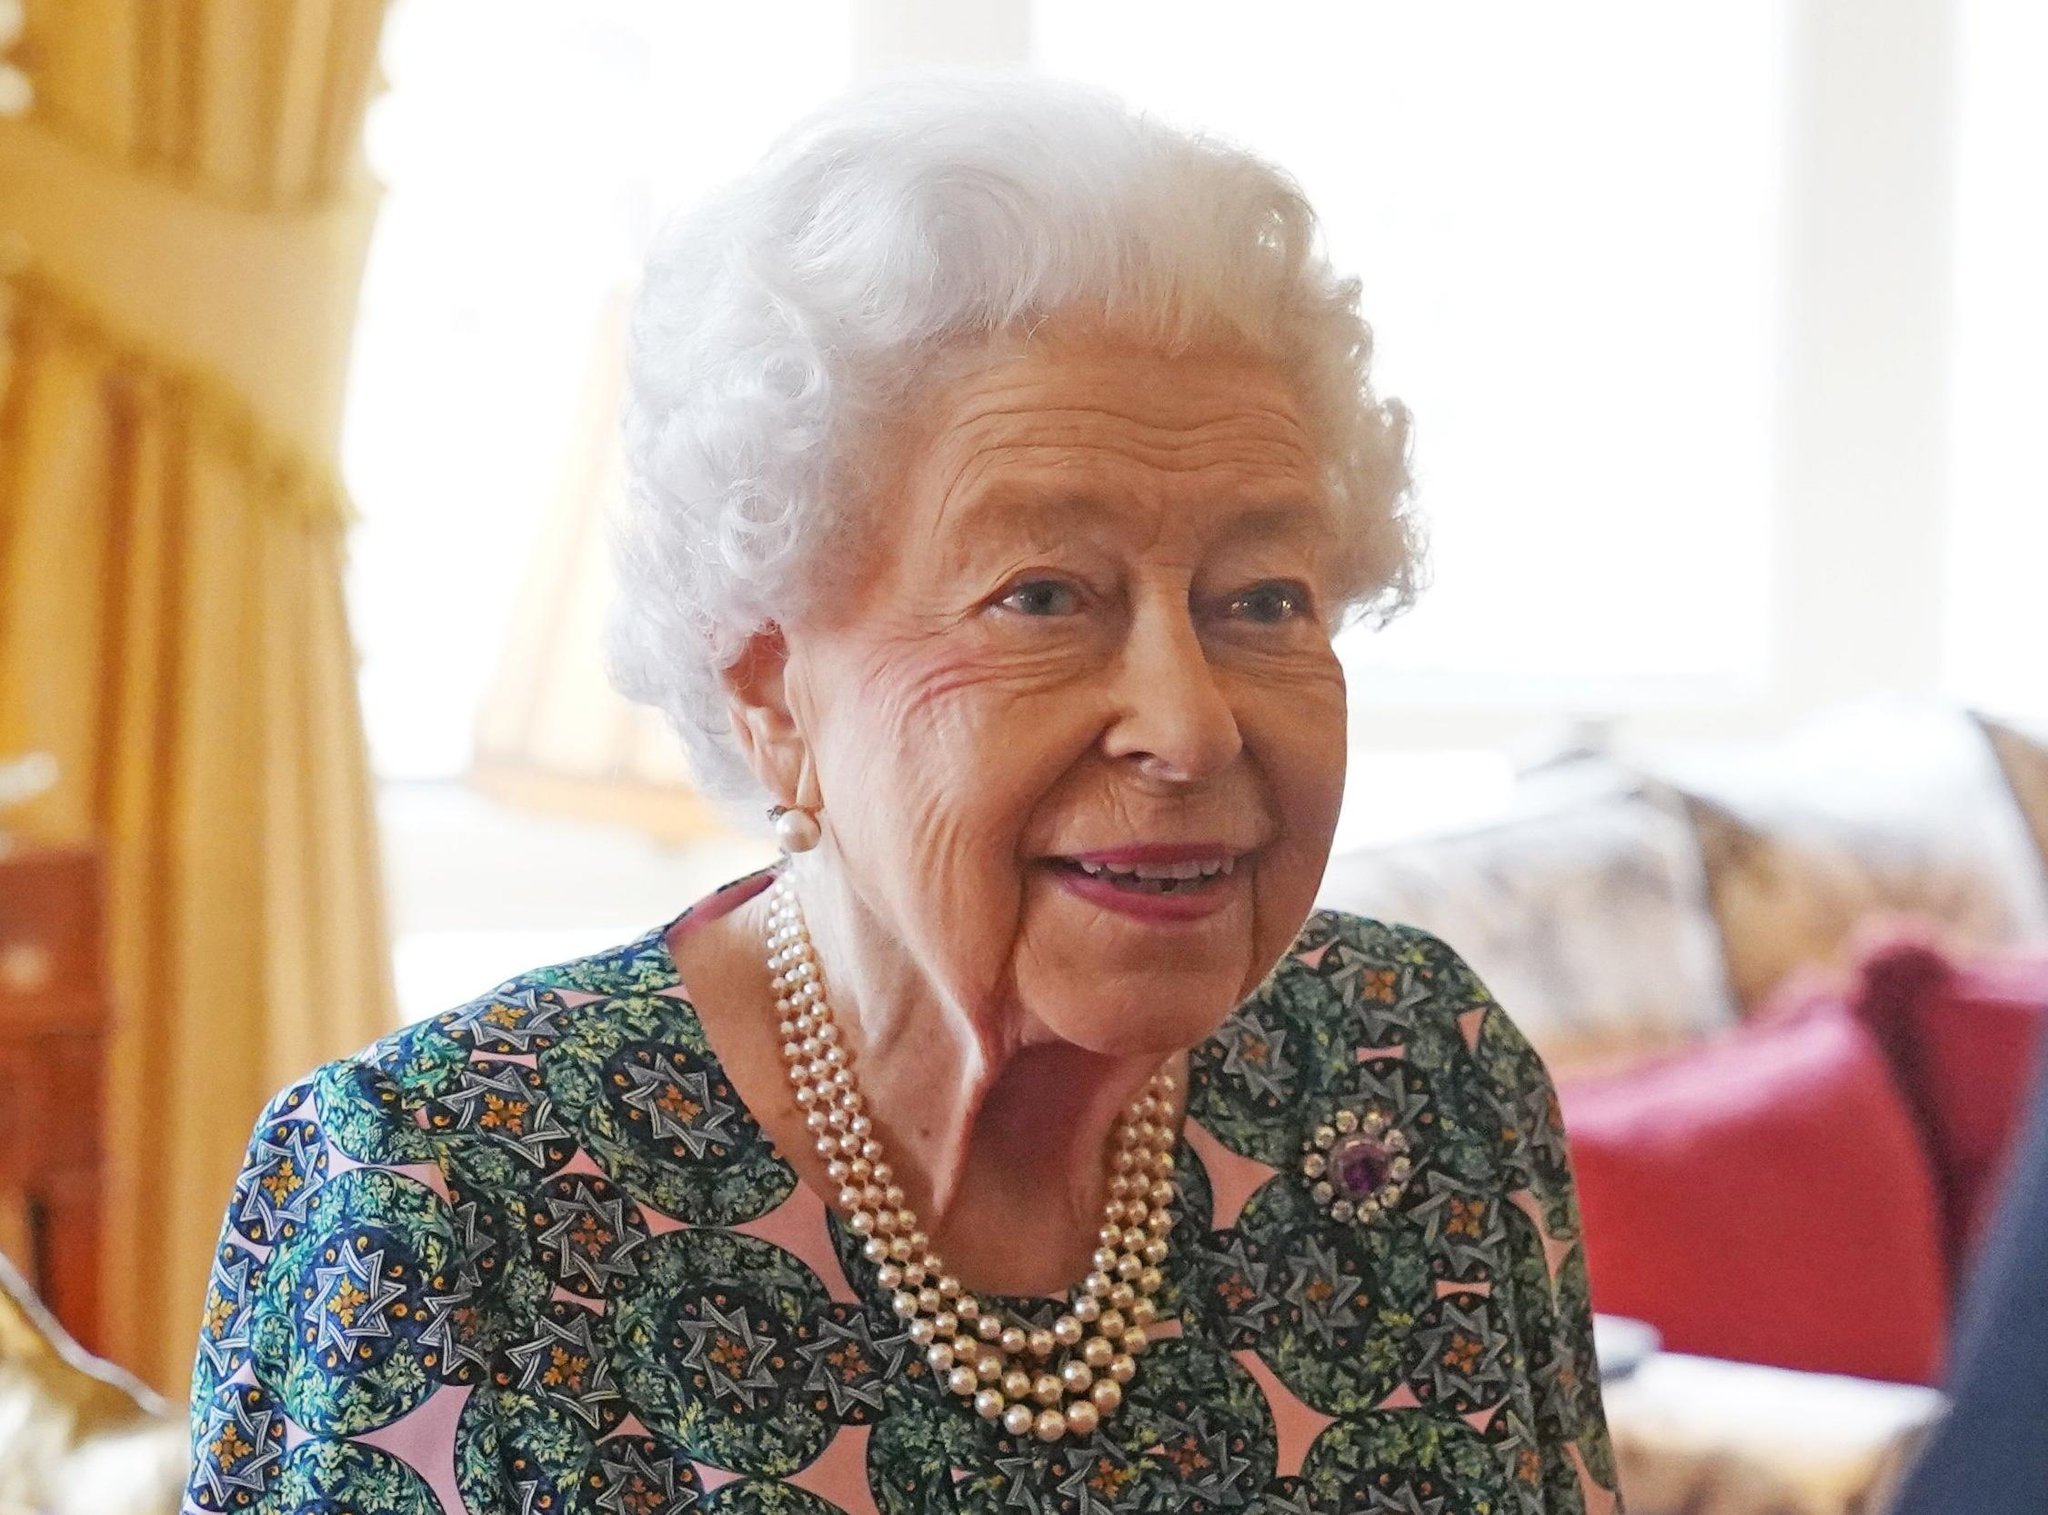 Testing times can give us strength, says Queen